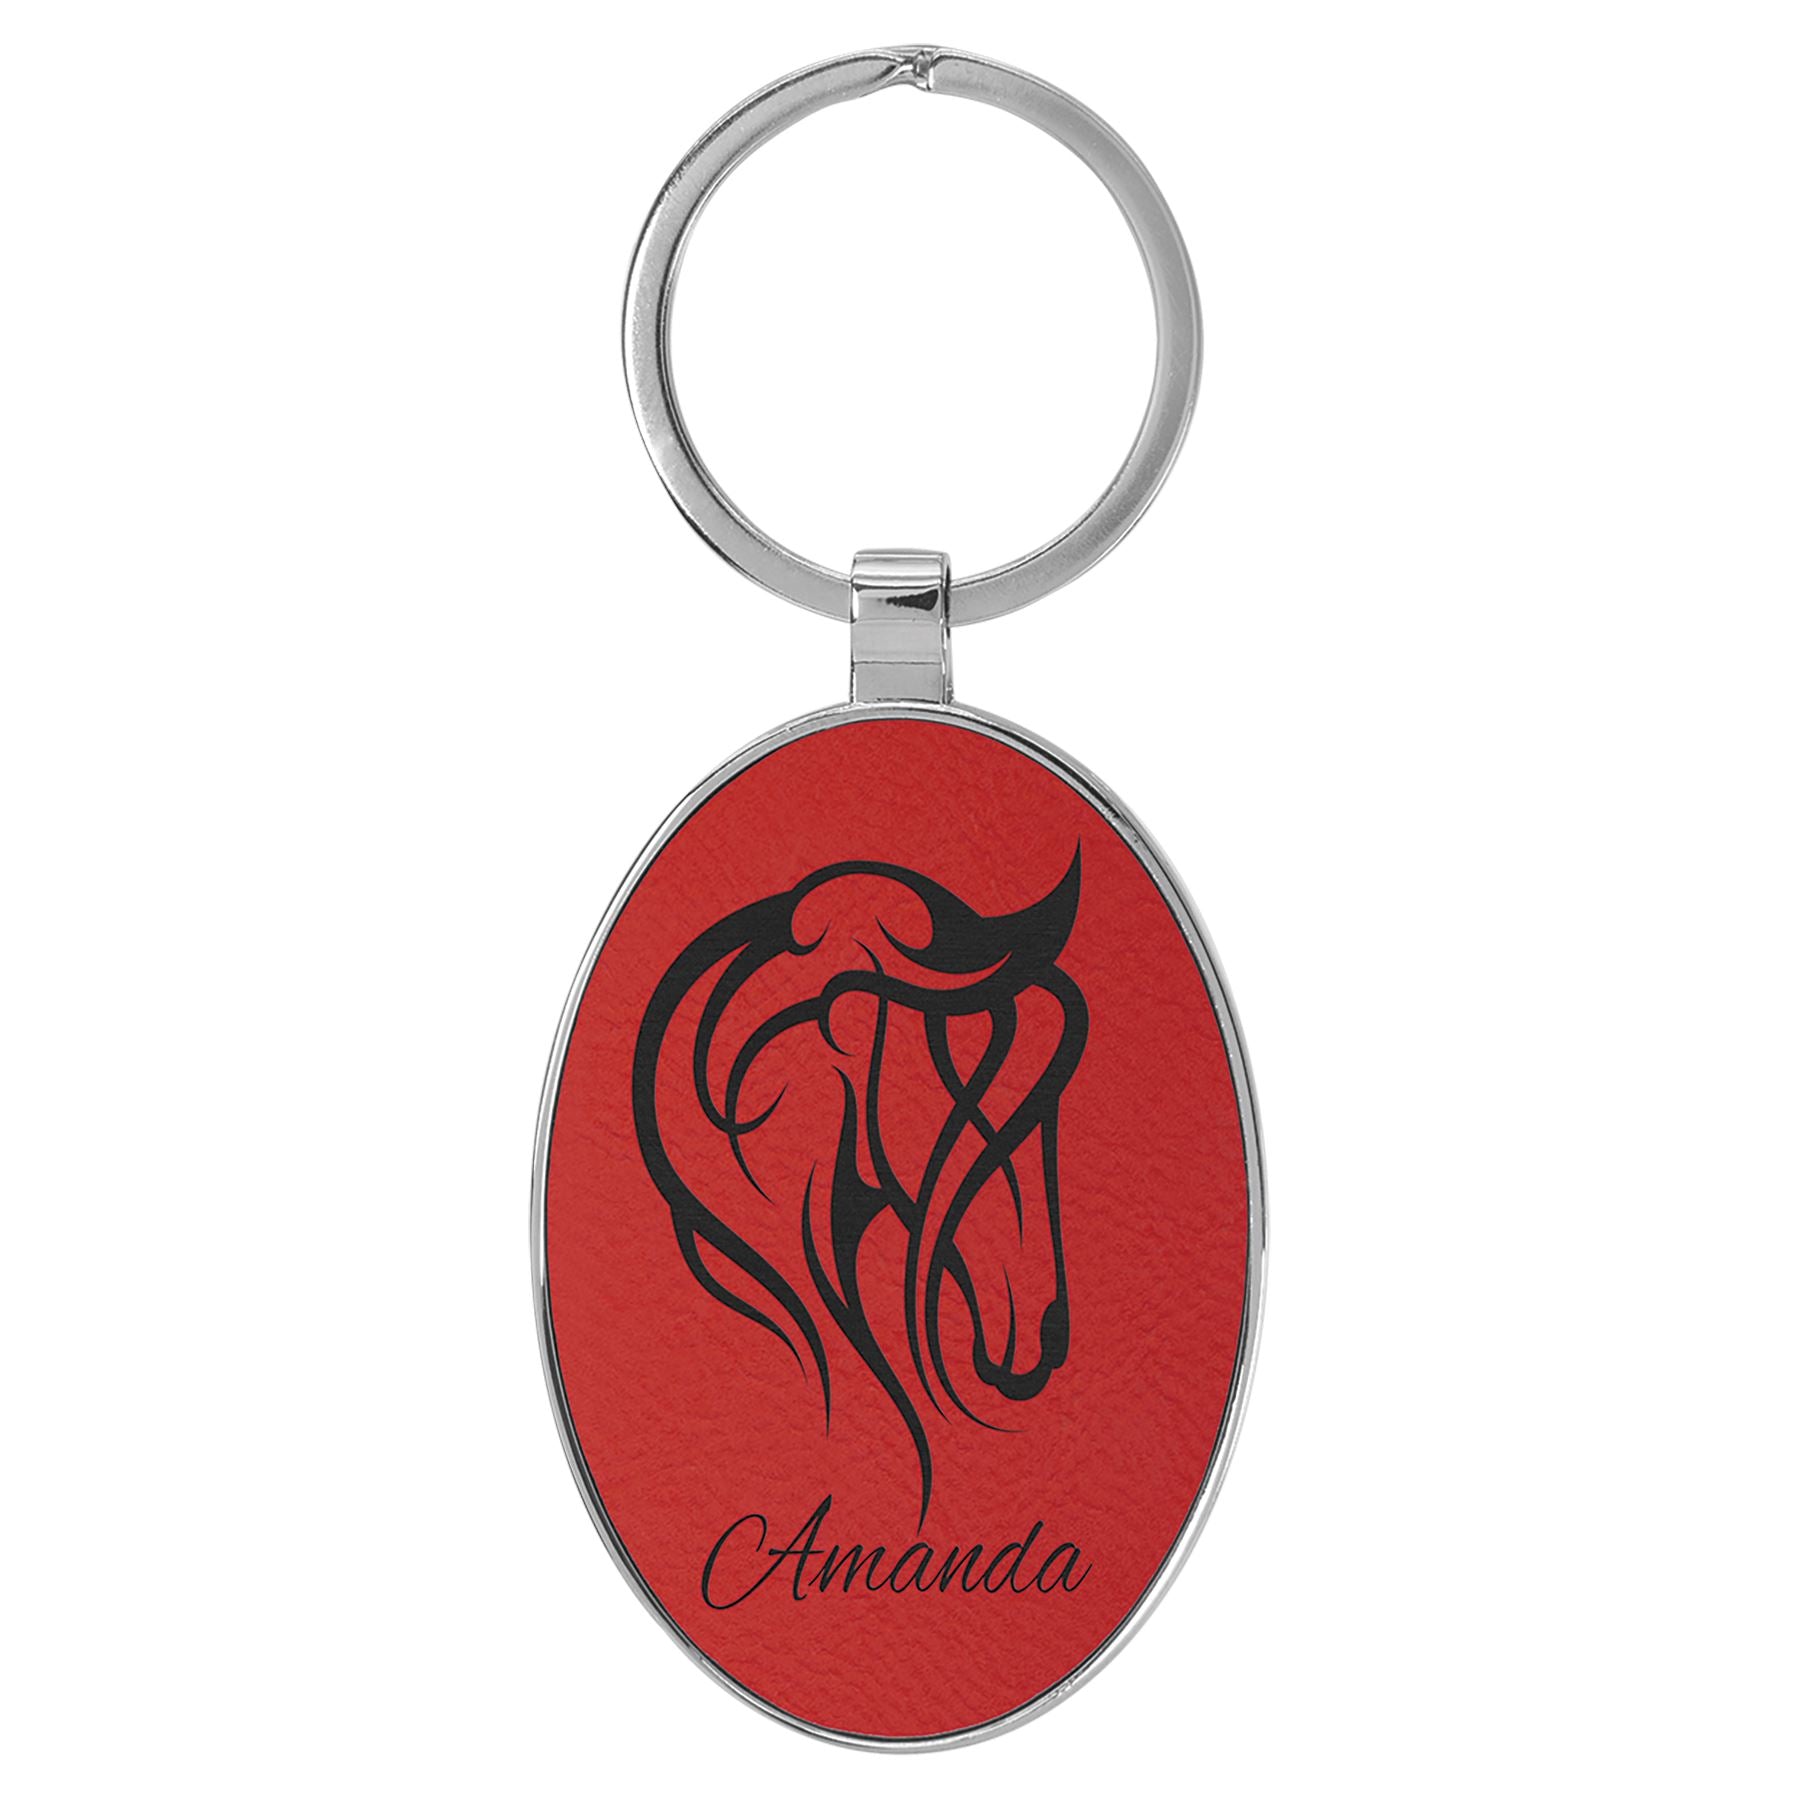 Oval Shaped Metal Keychain w/Leatherette, 3" x 1 3/4", Laser Engraved Keychain Craftworks NW Red/Black 1-Side 